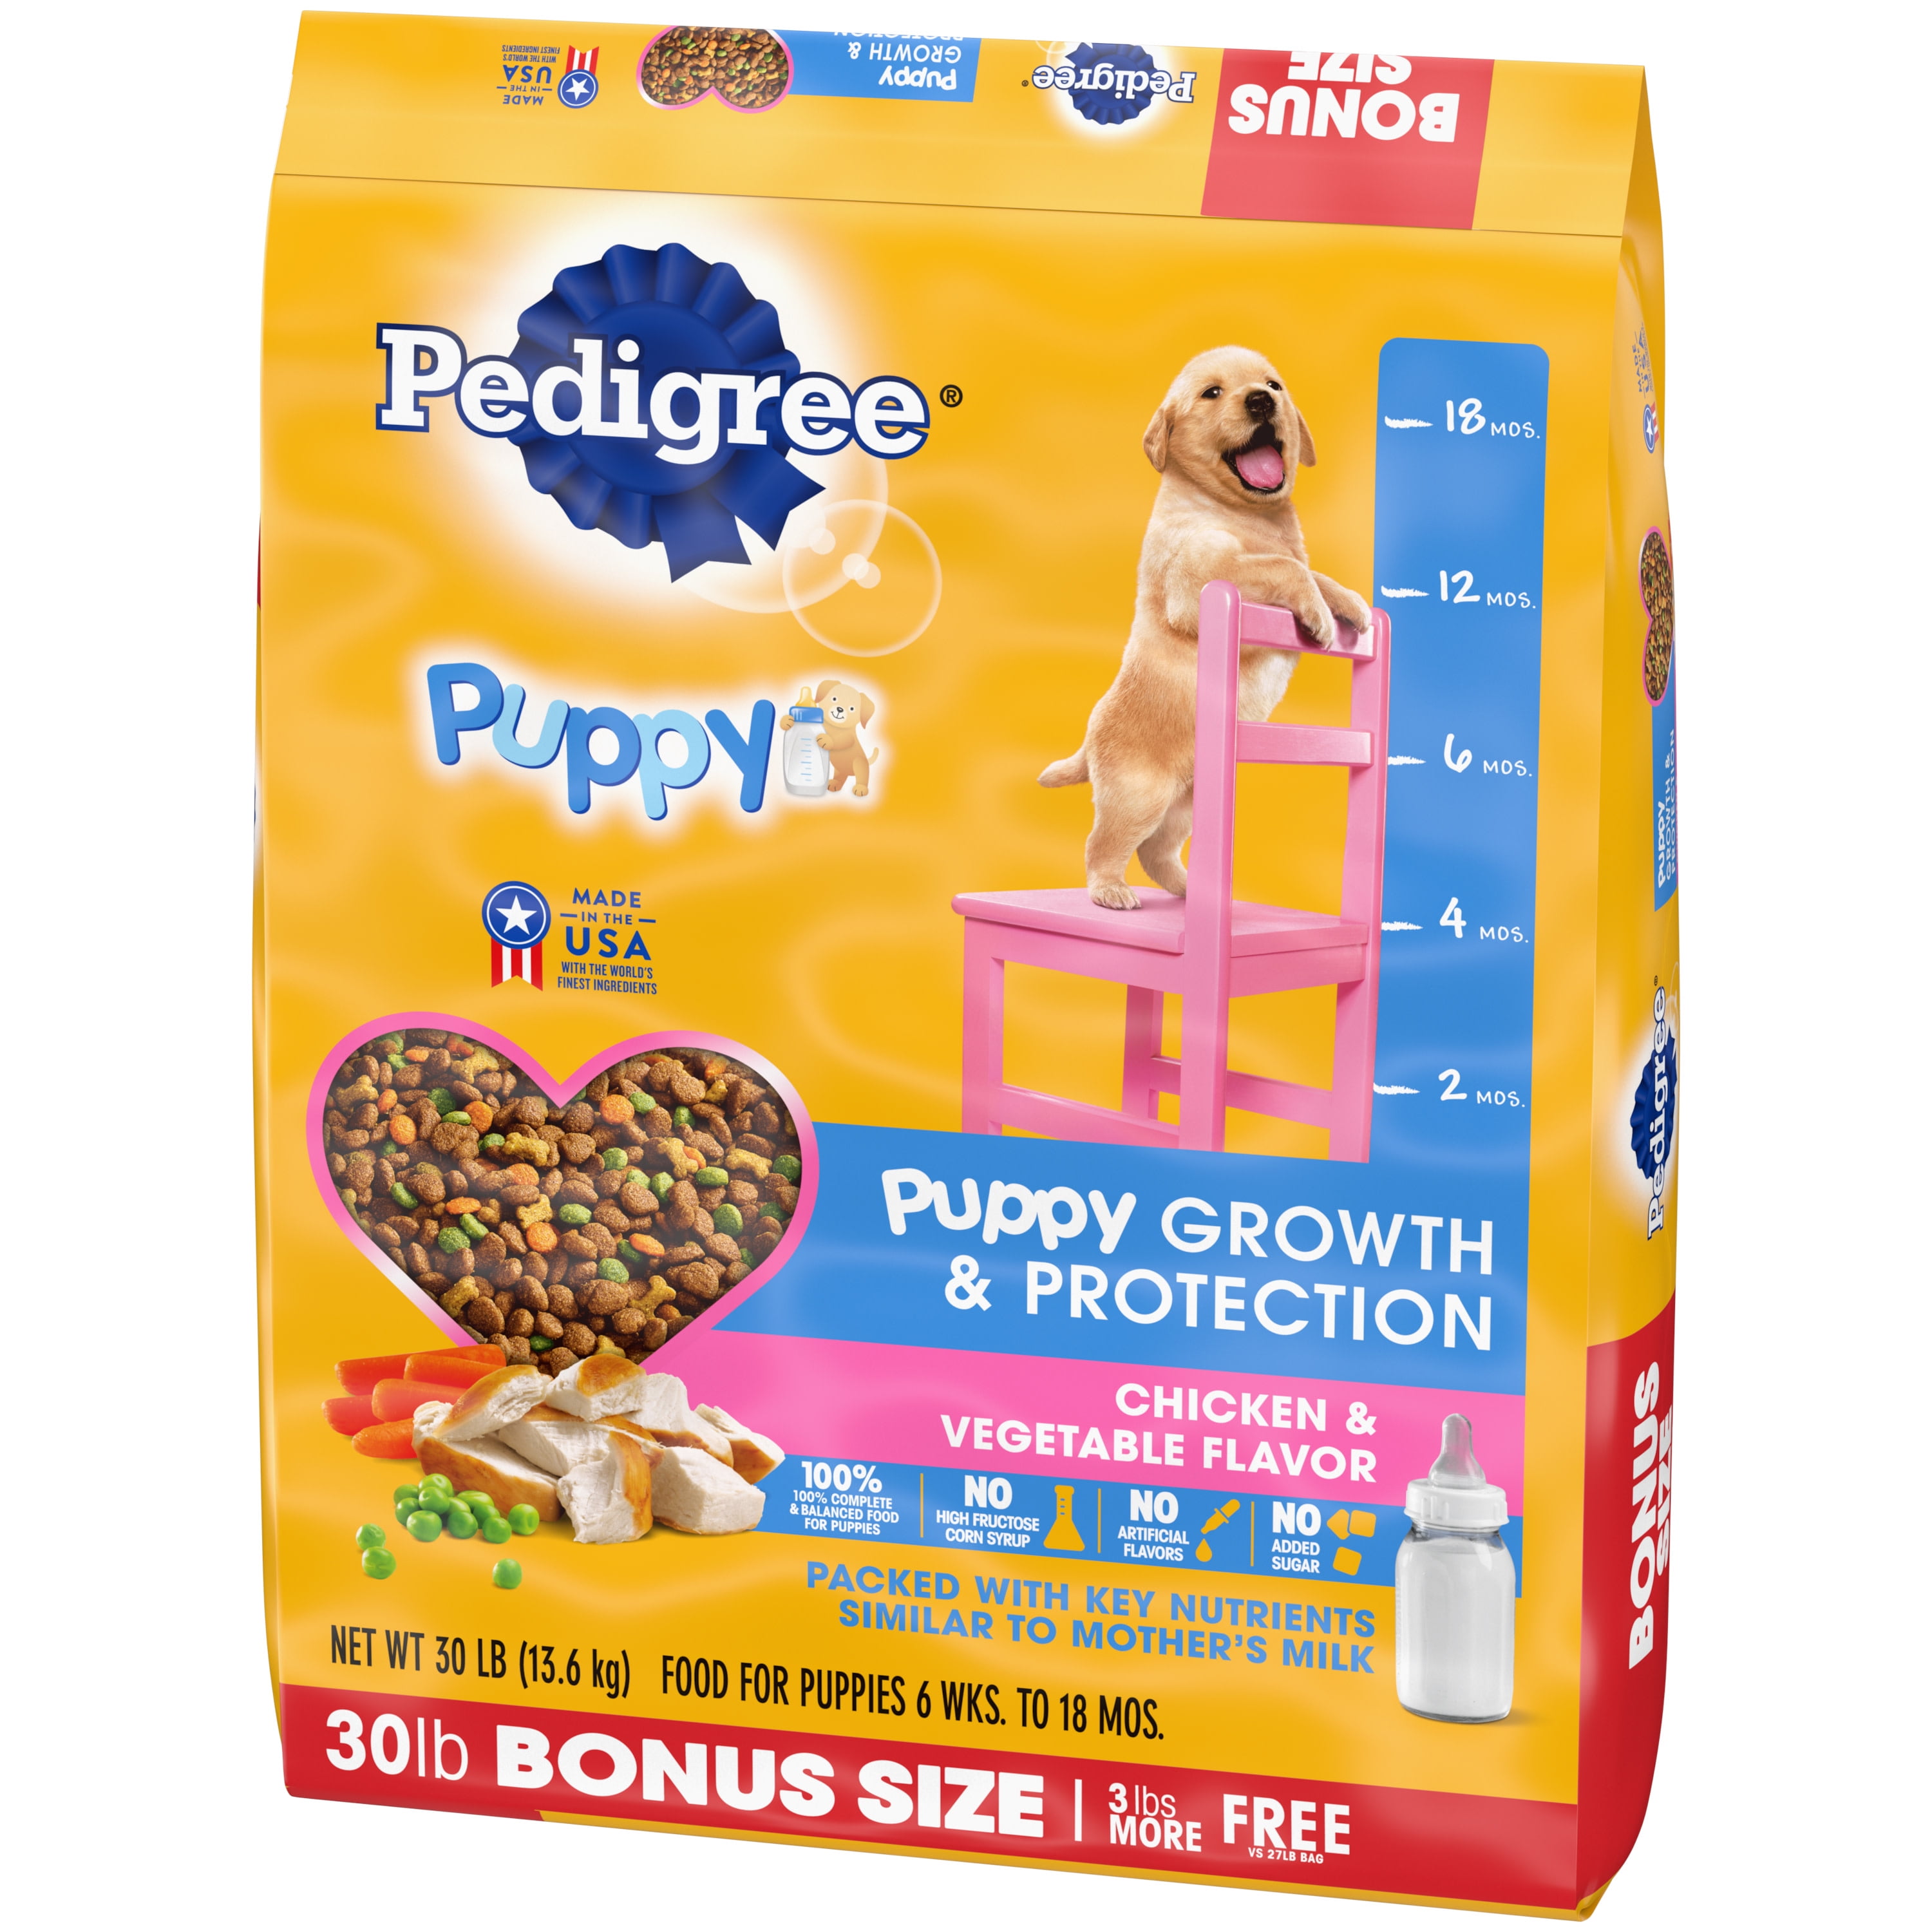 Pedigree Puppy Growth & Protection Chicken & Vegetable Flavor Dry Dog Food for Puppy, 30 lb. Bonus Bag - 3